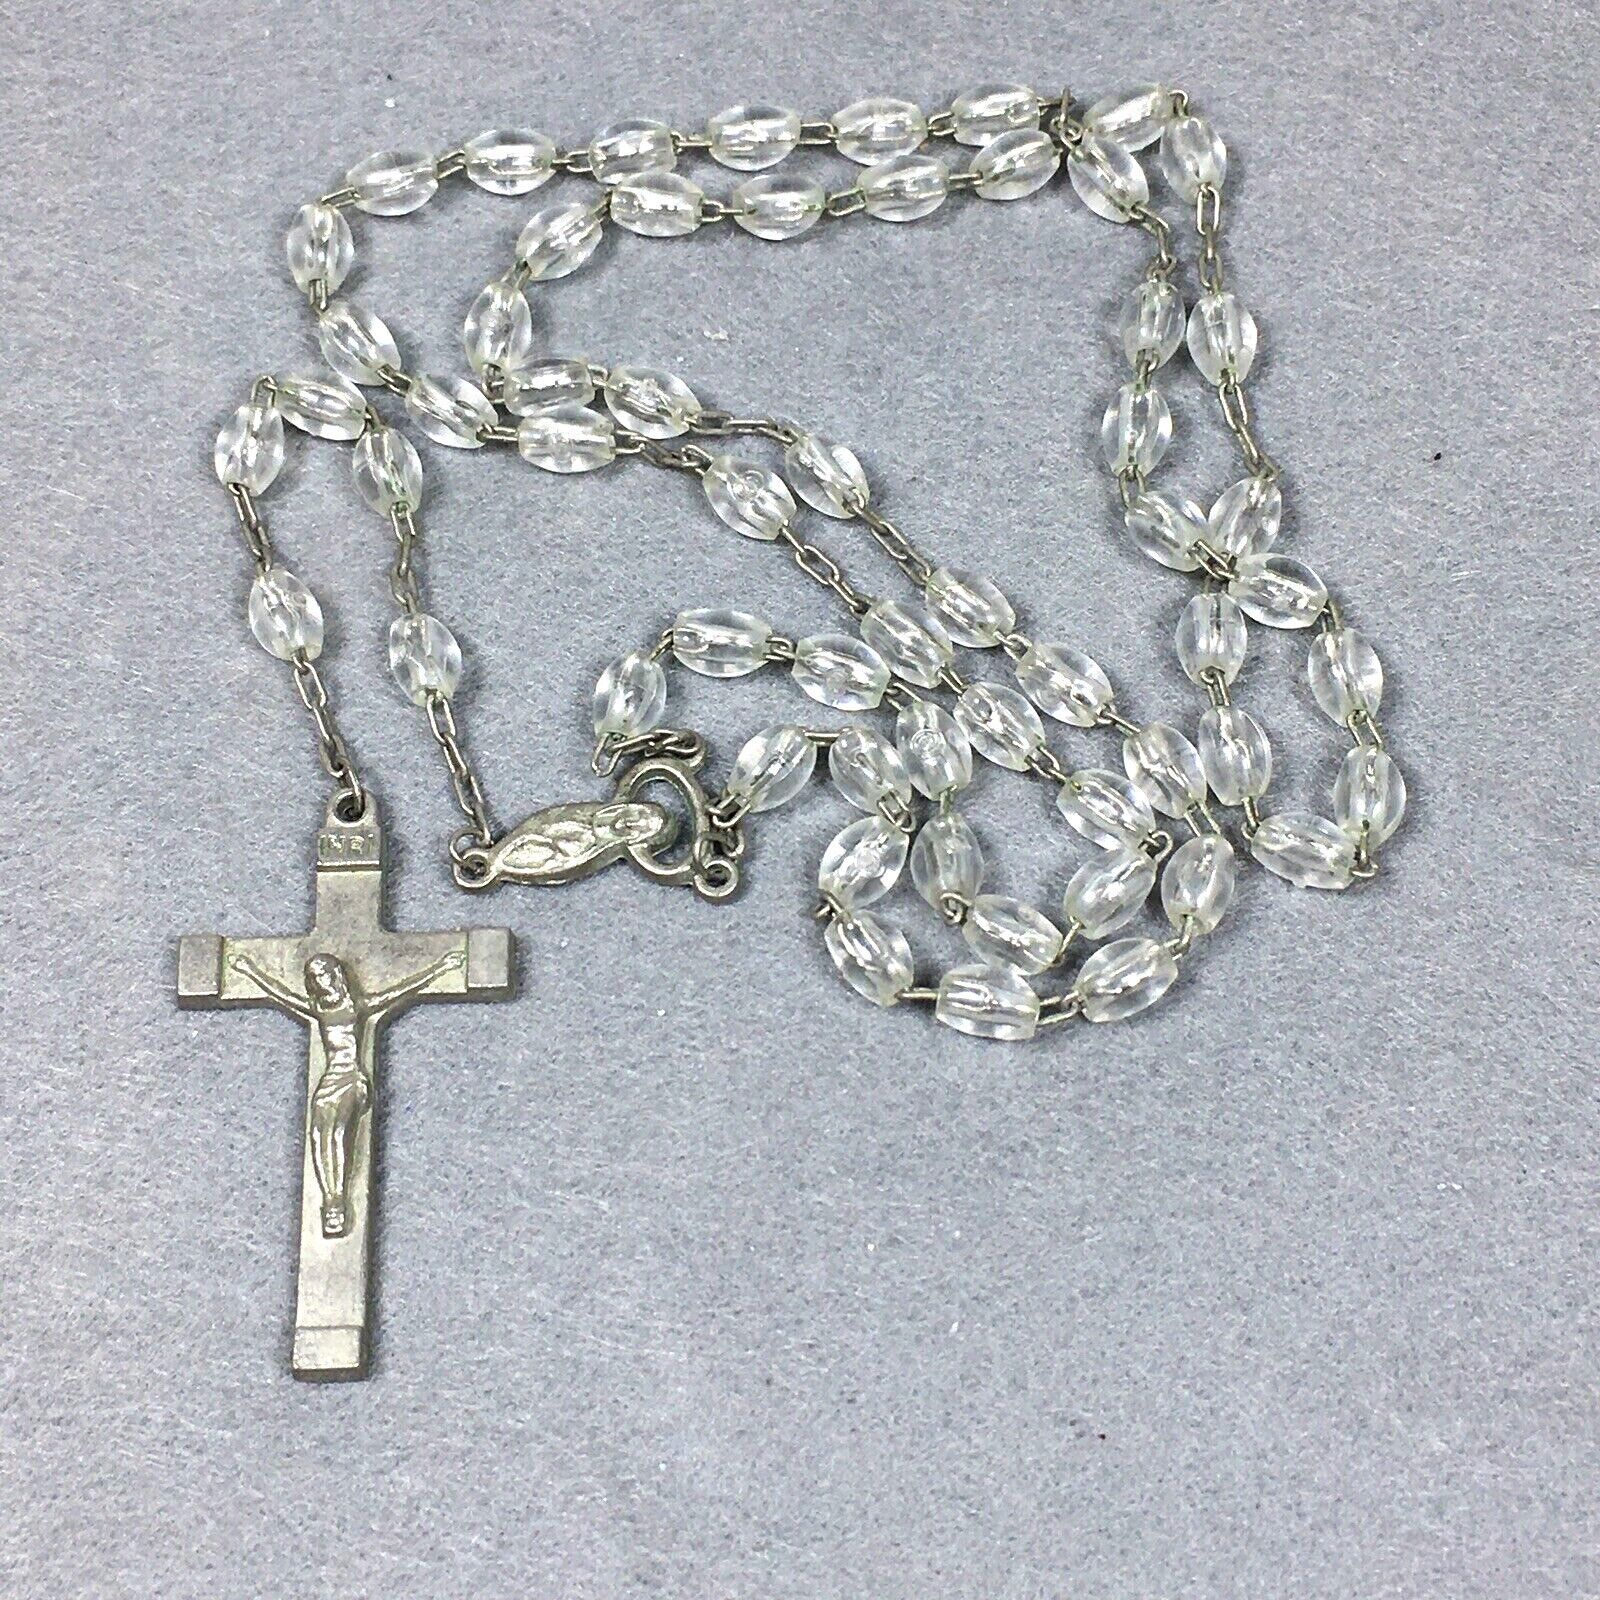 Primary image for Vintage Catholic Clear Beads 5 Decade Rosary Silver Tone Crucifix